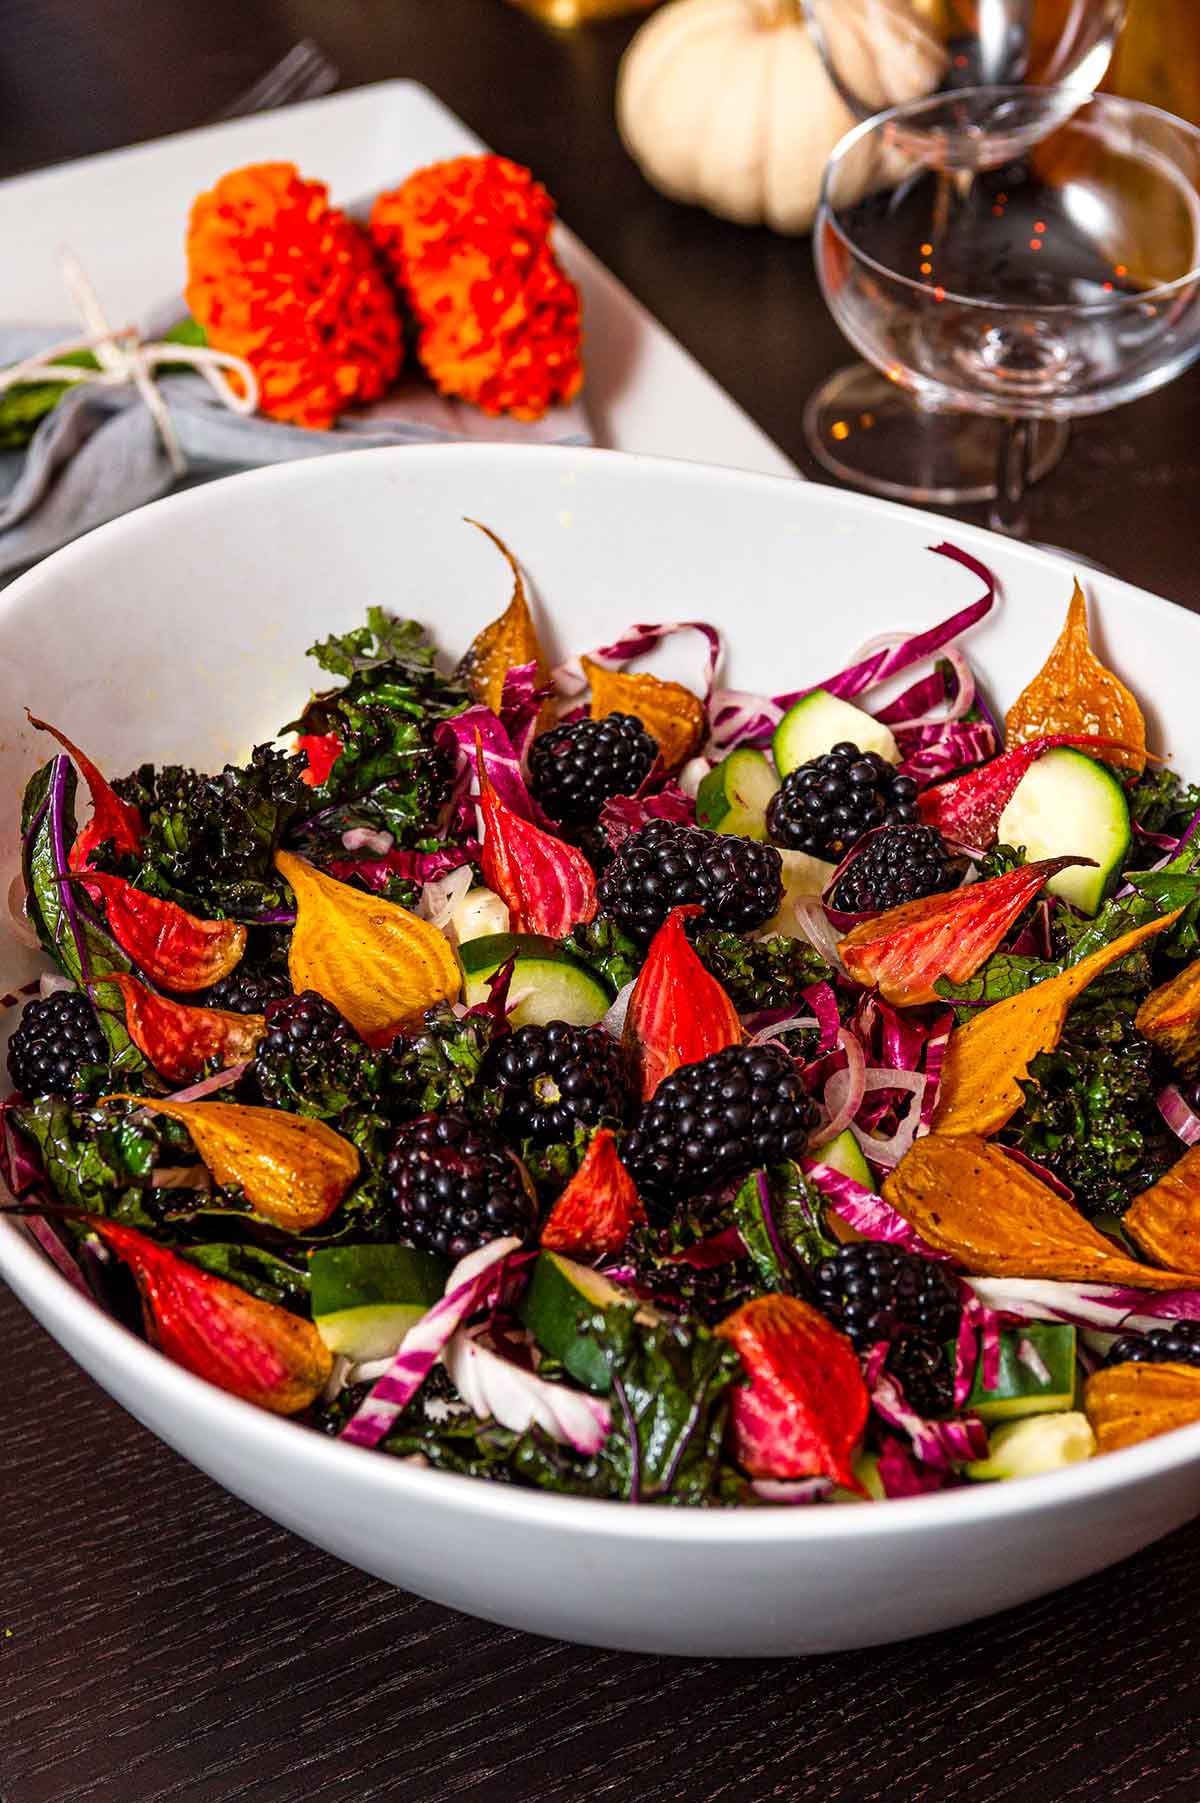 A colorful beet salad in a bowl beside marigolds in a napkin.